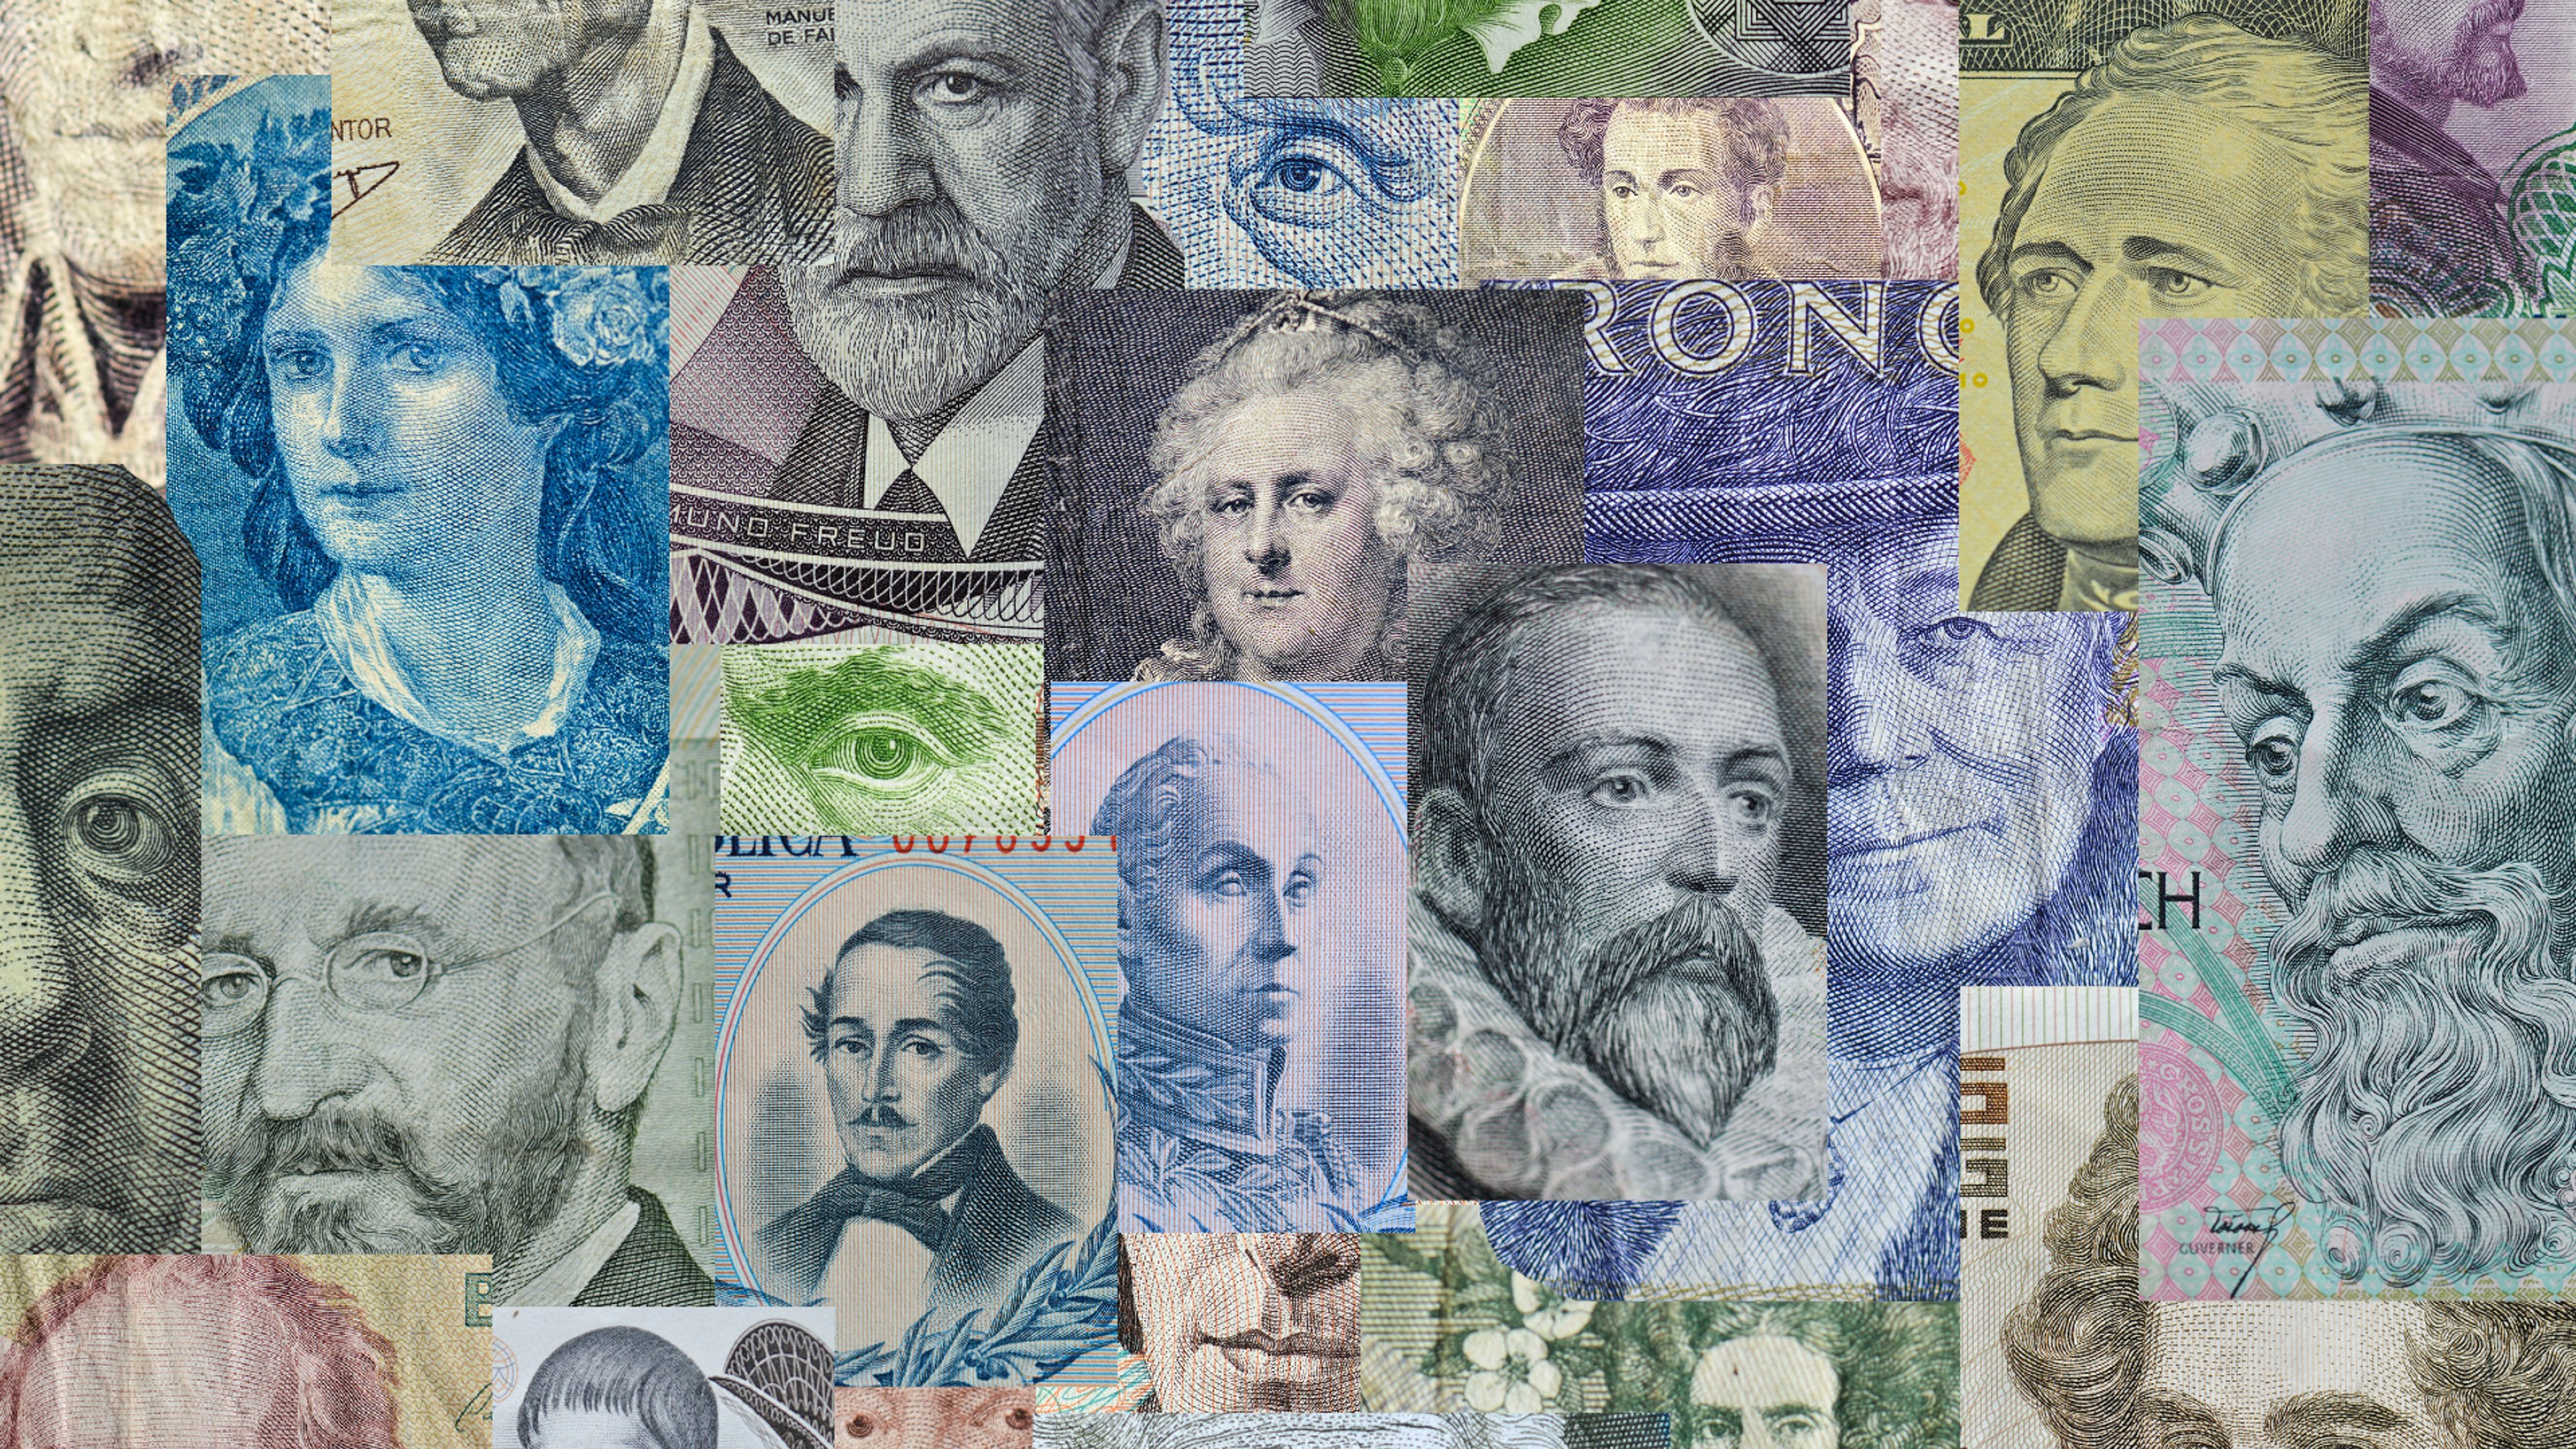 A collage of various international banknotes featuring portraits of historical figures.